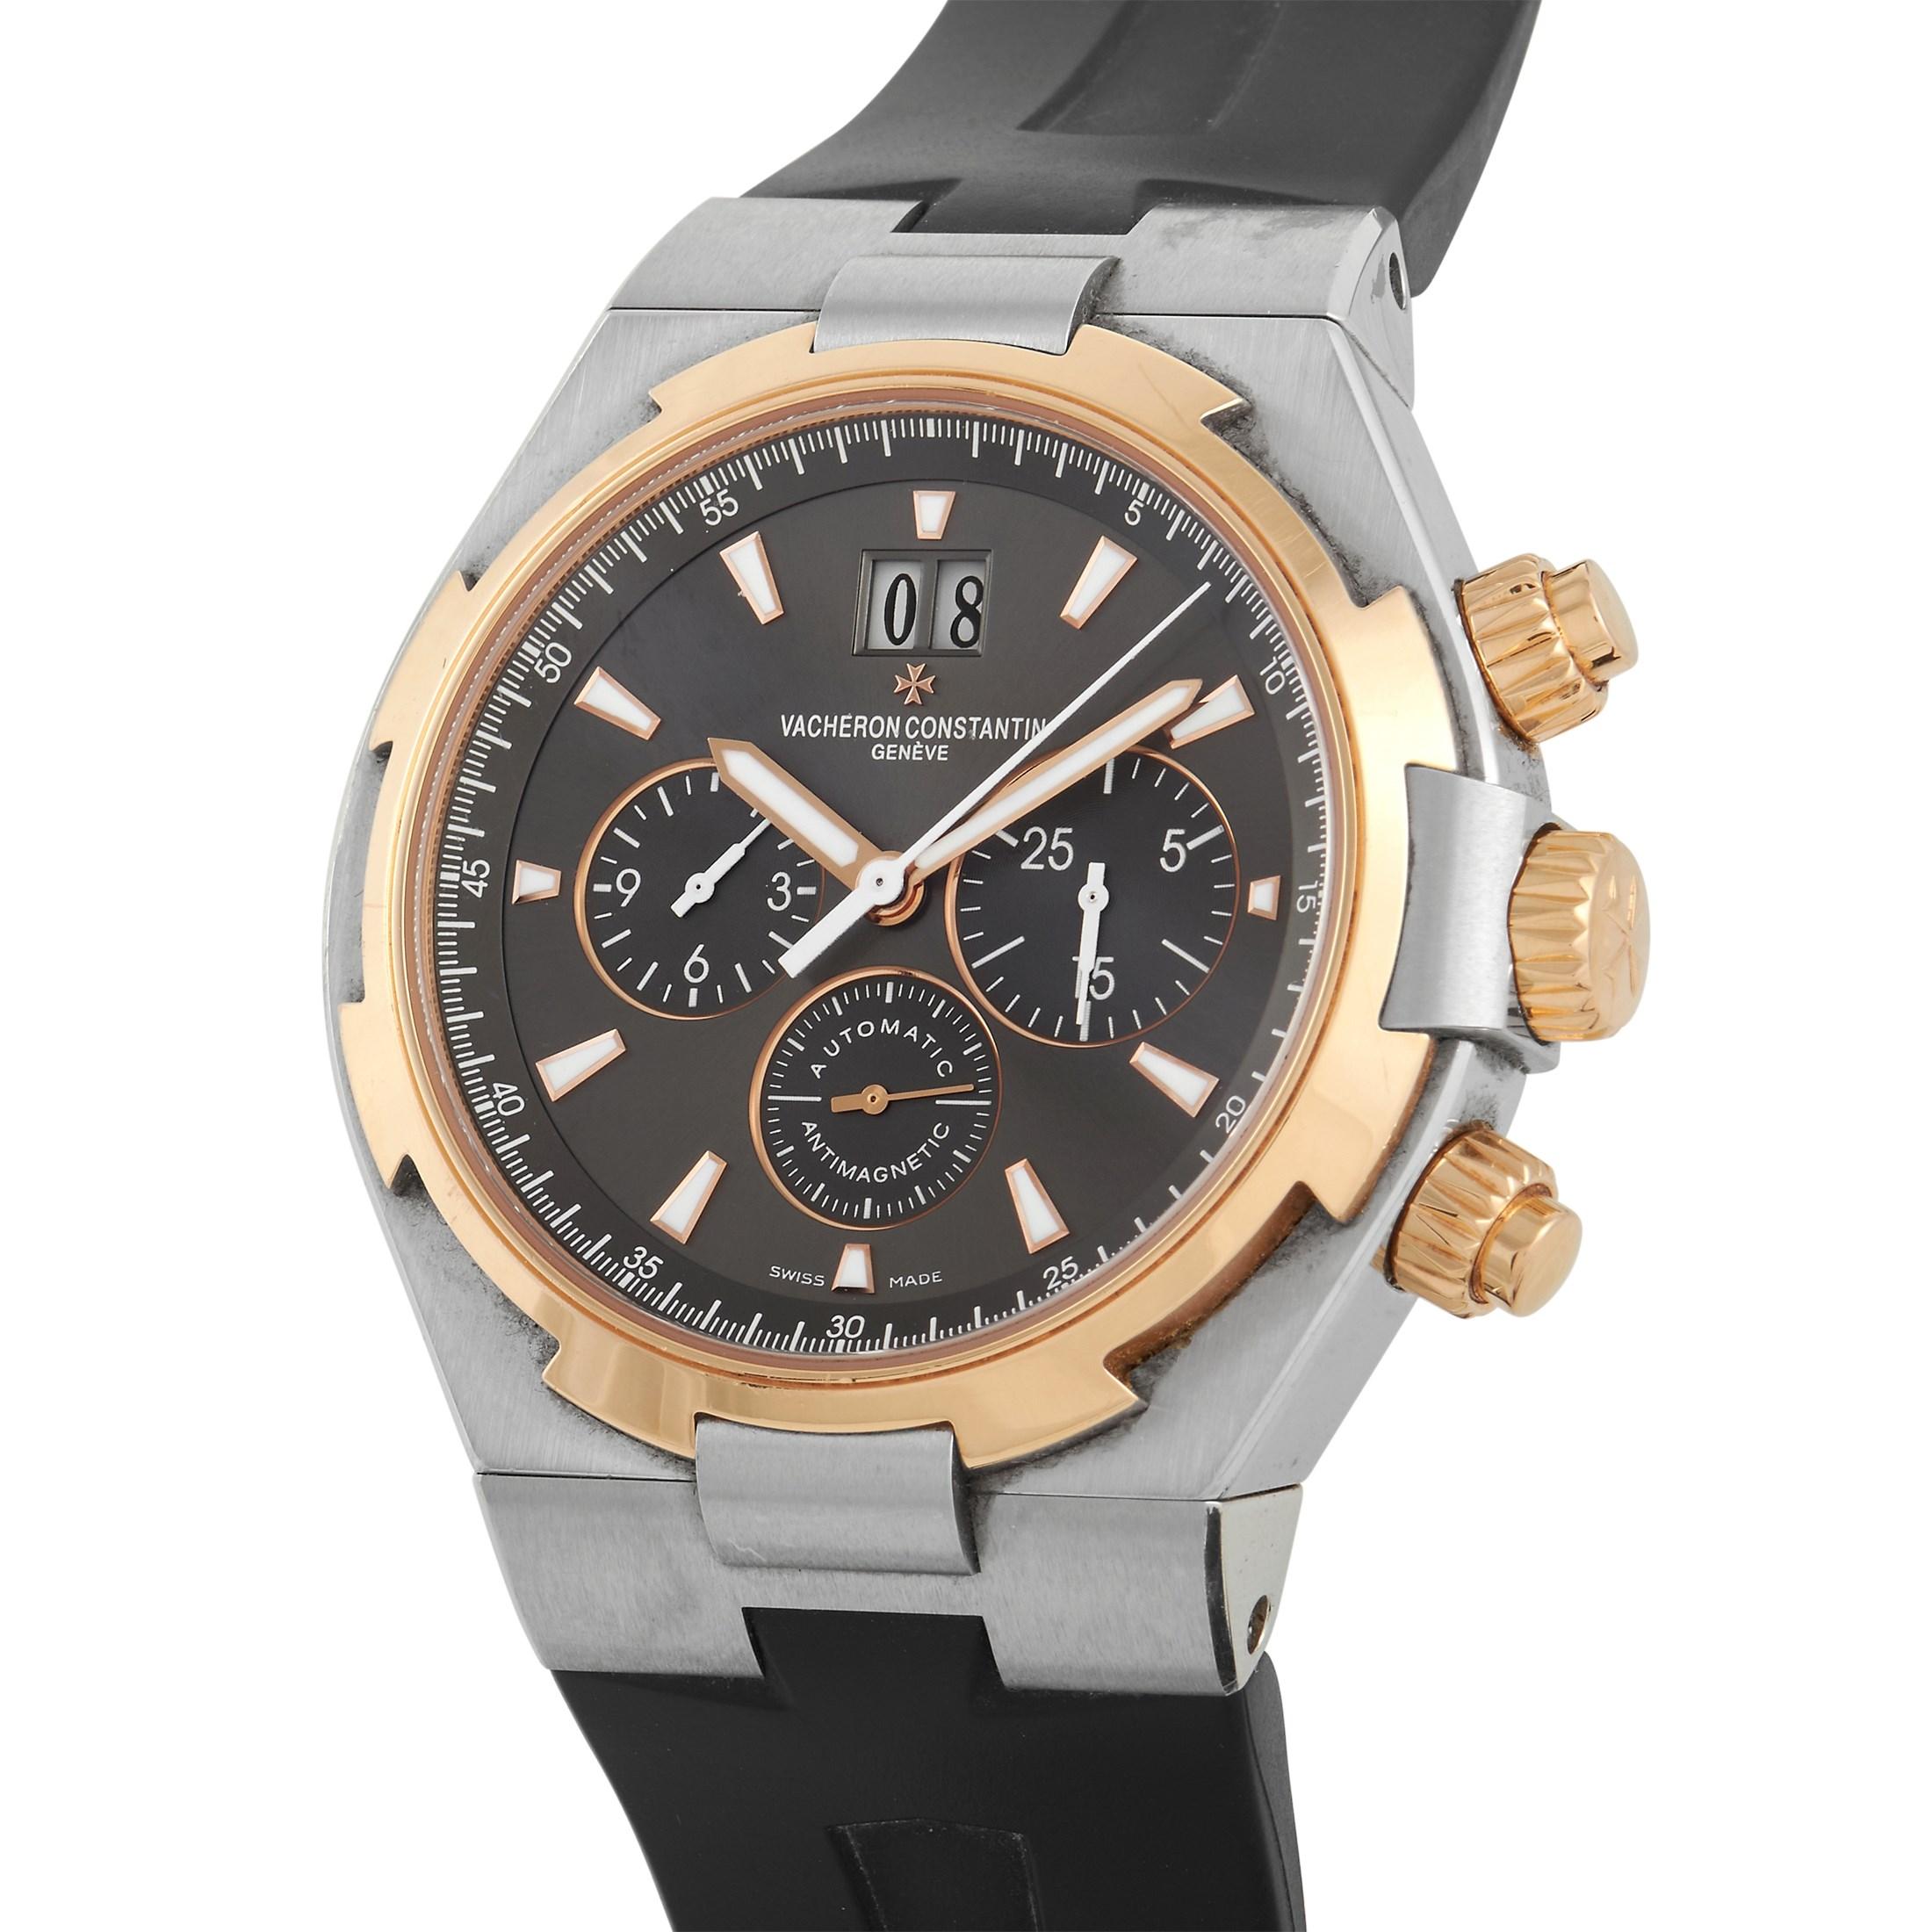 The Vacheron Constantin Overseas Chronograph Watch, reference number 49150, will redefine the way you think about luxury timepieces. 

Bold and sophisticated in design, this watch includes a 42mm stainless steel case and an opulent 18K Rose Gold